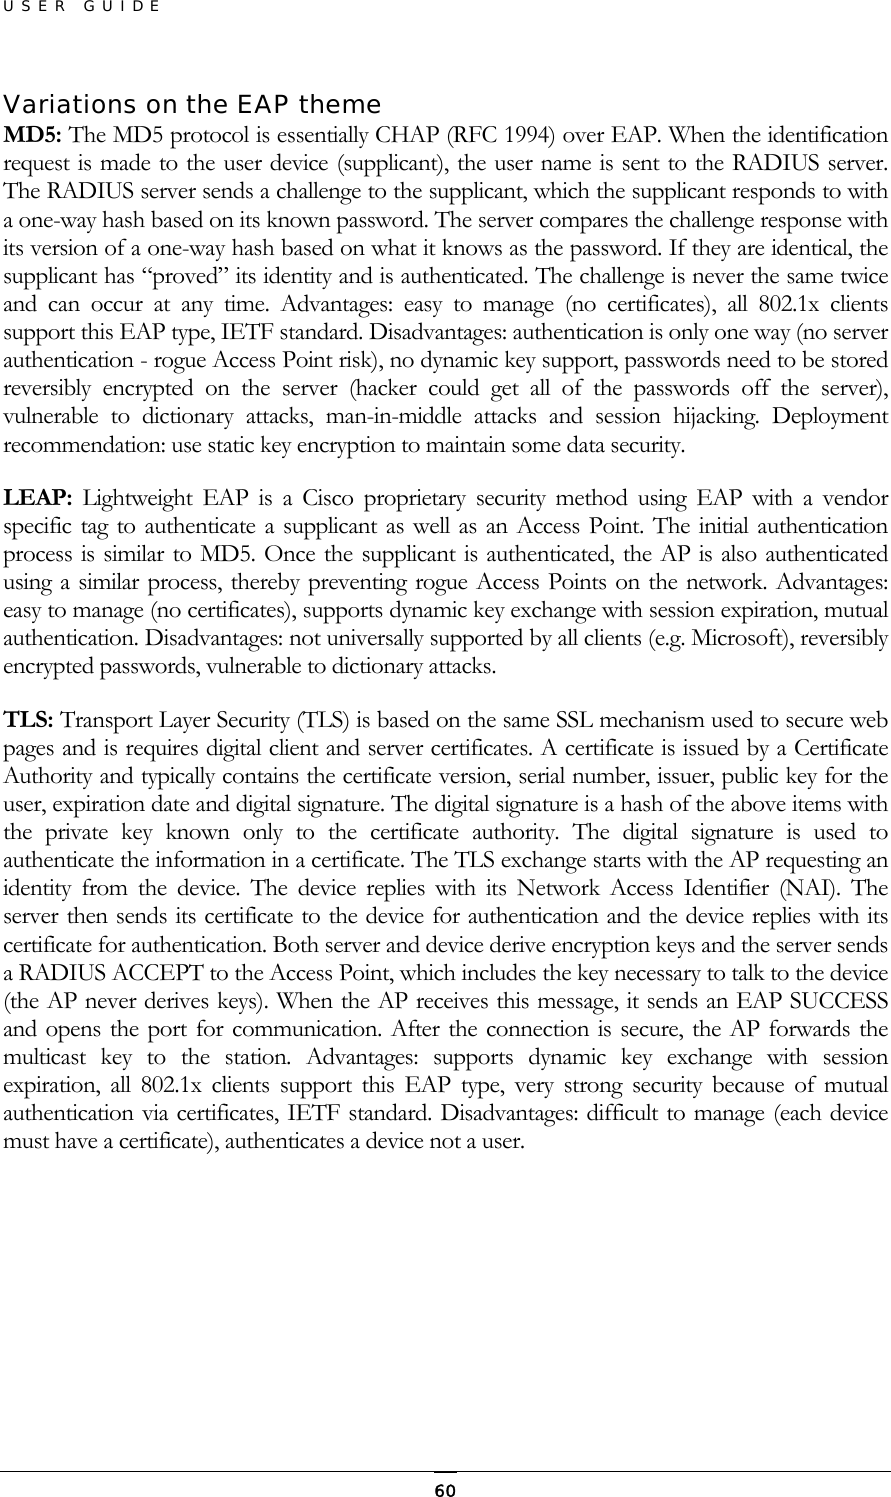 USER GUIDE Variations on the EAP theme MD5: The MD5 protocol is essentially CHAP (RFC 1994) over EAP. When the identification request is made to the user device (supplicant), the user name is sent to the RADIUS server. The RADIUS server sends a challenge to the supplicant, which the supplicant responds to with a one-way hash based on its known password. The server compares the challenge response with its version of a one-way hash based on what it knows as the password. If they are identical, the supplicant has “proved” its identity and is authenticated. The challenge is never the same twice and can occur at any time. Advantages: easy to manage (no certificates), all 802.1x clients support this EAP type, IETF standard. Disadvantages: authentication is only one way (no server authentication - rogue Access Point risk), no dynamic key support, passwords need to be stored reversibly encrypted on the server (hacker could get all of the passwords off the server), vulnerable to dictionary attacks, man-in-middle attacks and session hijacking. Deployment recommendation: use static key encryption to maintain some data security. LEAP: Lightweight EAP is a Cisco proprietary security method using EAP with a vendor specific tag to authenticate a supplicant as well as an Access Point. The initial authentication process is similar to MD5. Once the supplicant is authenticated, the AP is also authenticated using a similar process, thereby preventing rogue Access Points on the network. Advantages: easy to manage (no certificates), supports dynamic key exchange with session expiration, mutual authentication. Disadvantages: not universally supported by all clients (e.g. Microsoft), reversibly encrypted passwords, vulnerable to dictionary attacks. TLS: Transport Layer Security (TLS) is based on the same SSL mechanism used to secure web pages and is requires digital client and server certificates. A certificate is issued by a Certificate Authority and typically contains the certificate version, serial number, issuer, public key for the user, expiration date and digital signature. The digital signature is a hash of the above items with the private key known only to the certificate authority. The digital signature is used to authenticate the information in a certificate. The TLS exchange starts with the AP requesting an identity from the device. The device replies with its Network Access Identifier (NAI). The server then sends its certificate to the device for authentication and the device replies with its certificate for authentication. Both server and device derive encryption keys and the server sends a RADIUS ACCEPT to the Access Point, which includes the key necessary to talk to the device (the AP never derives keys). When the AP receives this message, it sends an EAP SUCCESS and opens the port for communication. After the connection is secure, the AP forwards the multicast key to the station. Advantages: supports dynamic key exchange with session expiration, all 802.1x clients support this EAP type, very strong security because of mutual authentication via certificates, IETF standard. Disadvantages: difficult to manage (each device must have a certificate), authenticates a device not a user.      60